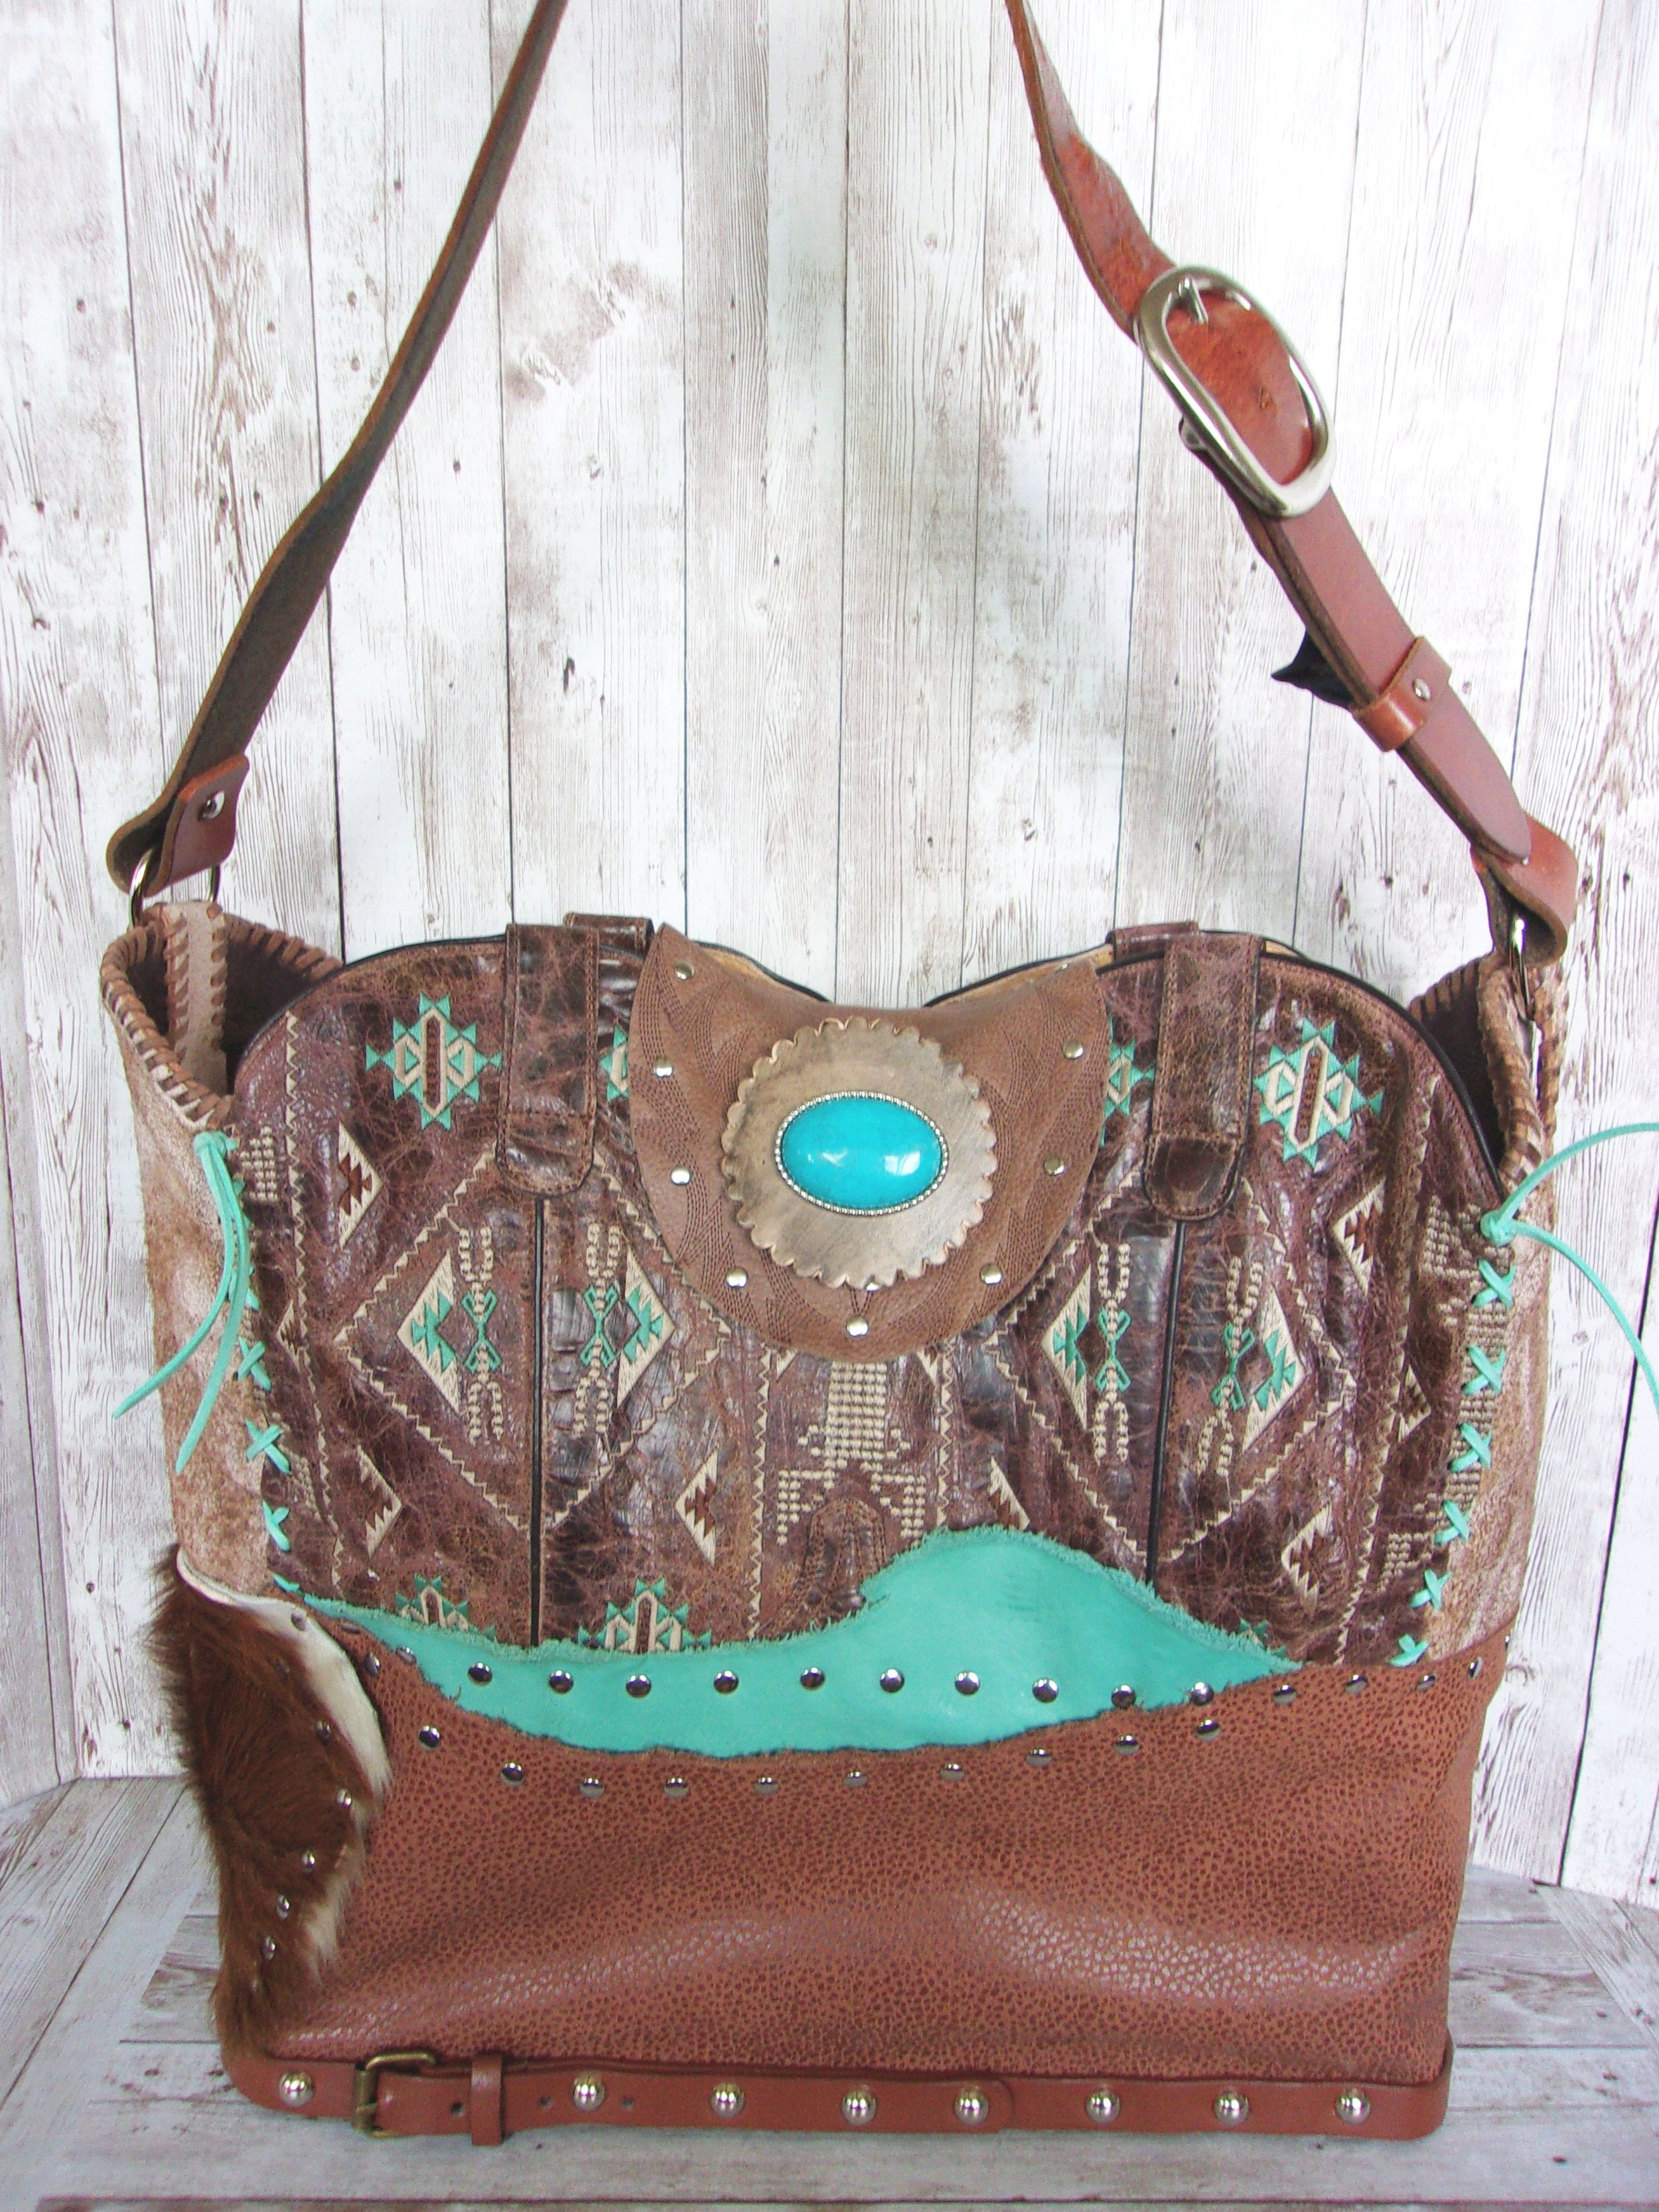 Western Laptop Tote - Extra Large Cowboy Boot Purse - Western Travel Bag LT41 cowboy boot purses, western fringe purse, handmade leather purses, boot purse, handmade western purse, custom leather handbags Chris Thompson Bags